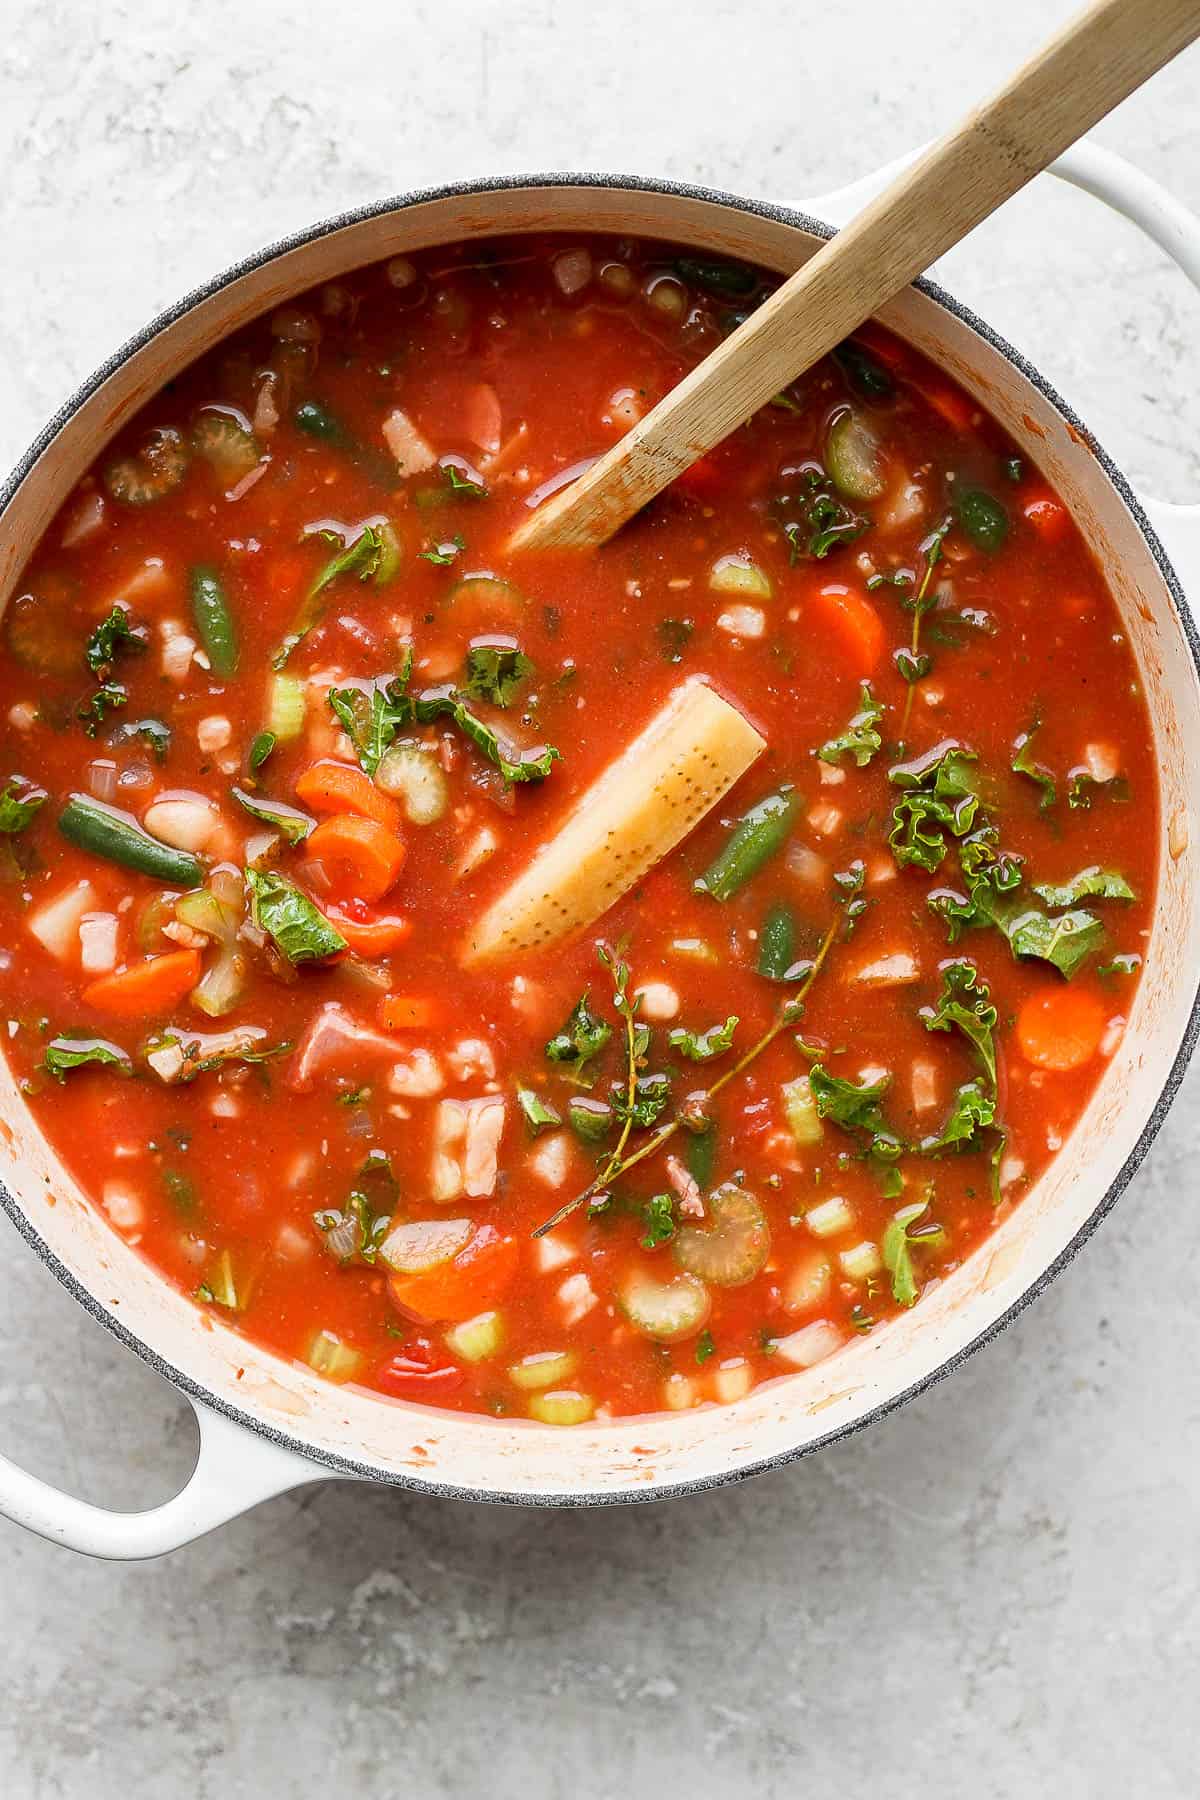 A fully mixed pot of minestrone soup.